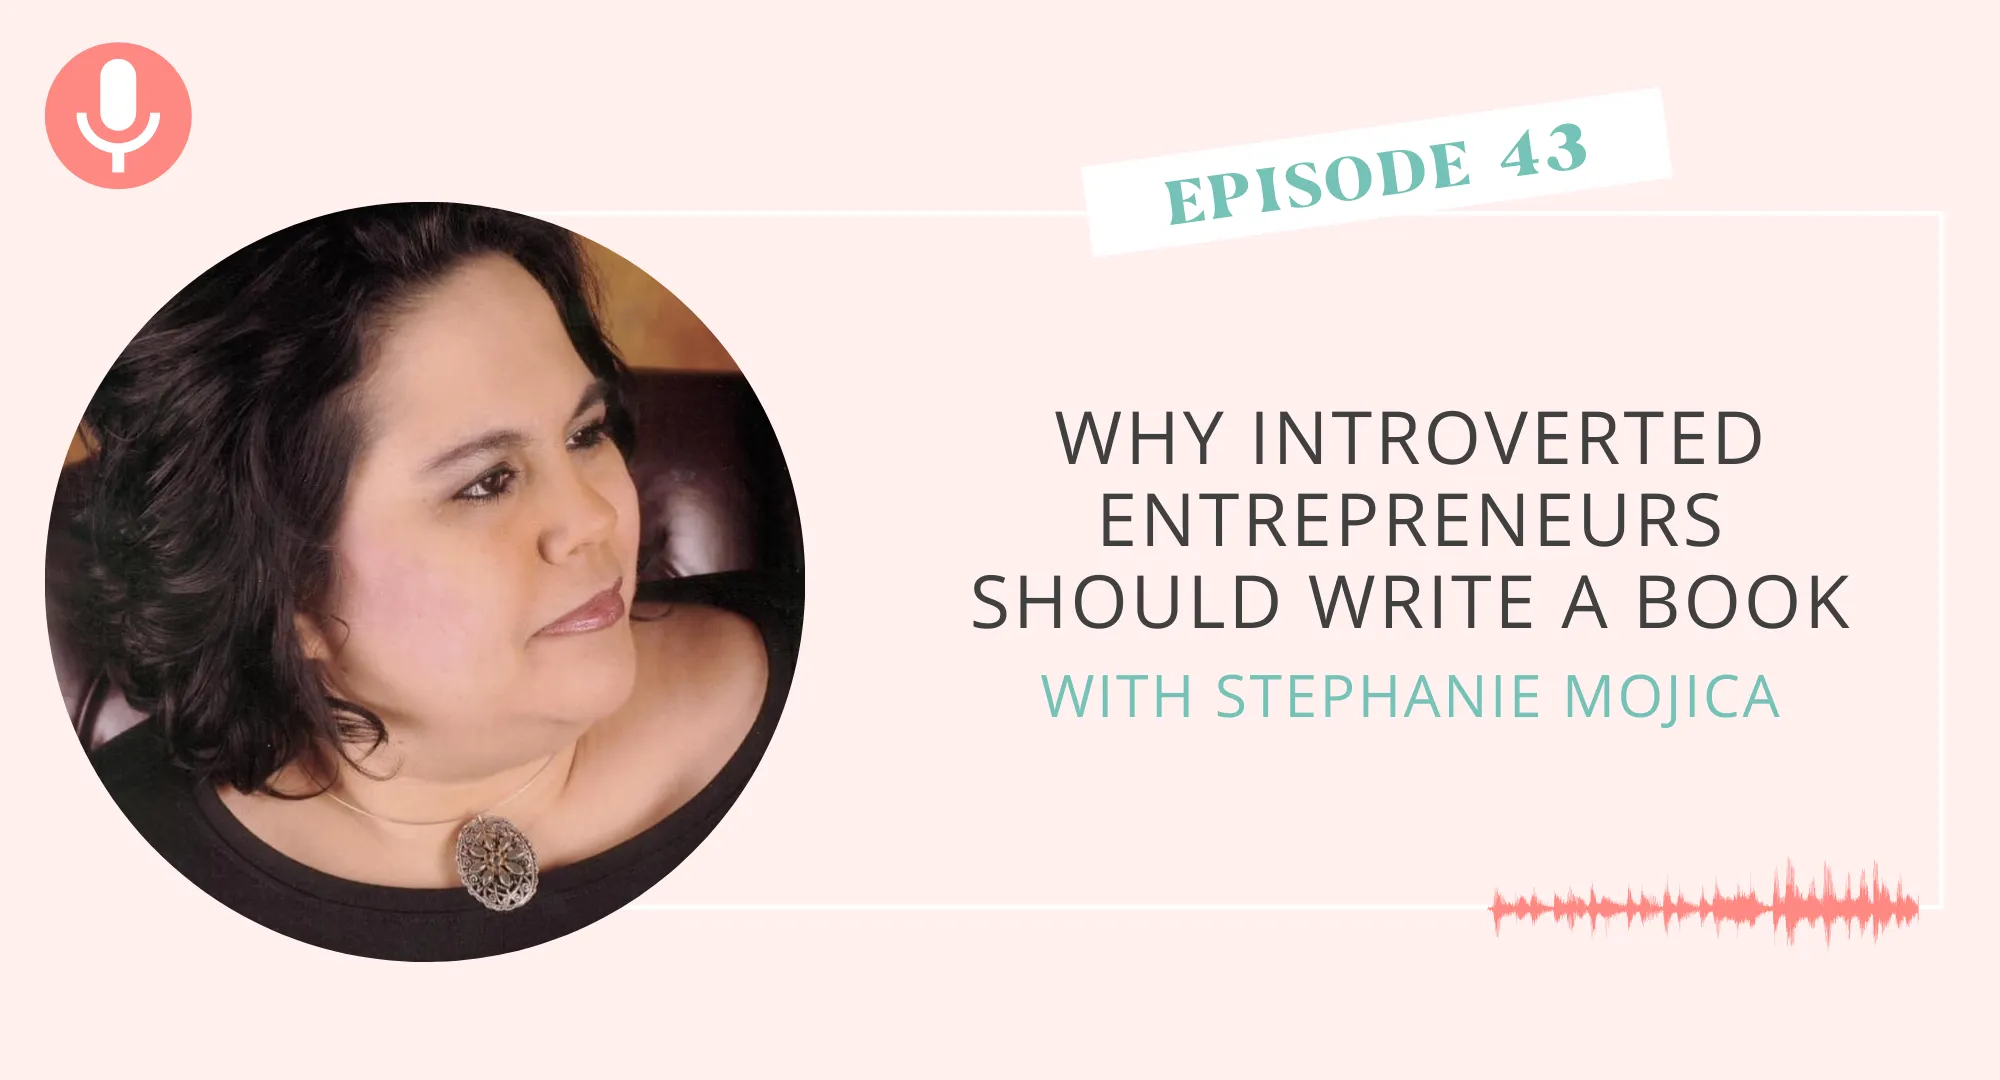 Why Introverted Entrepreneurs Should Write a Book with Stephanie Mojica